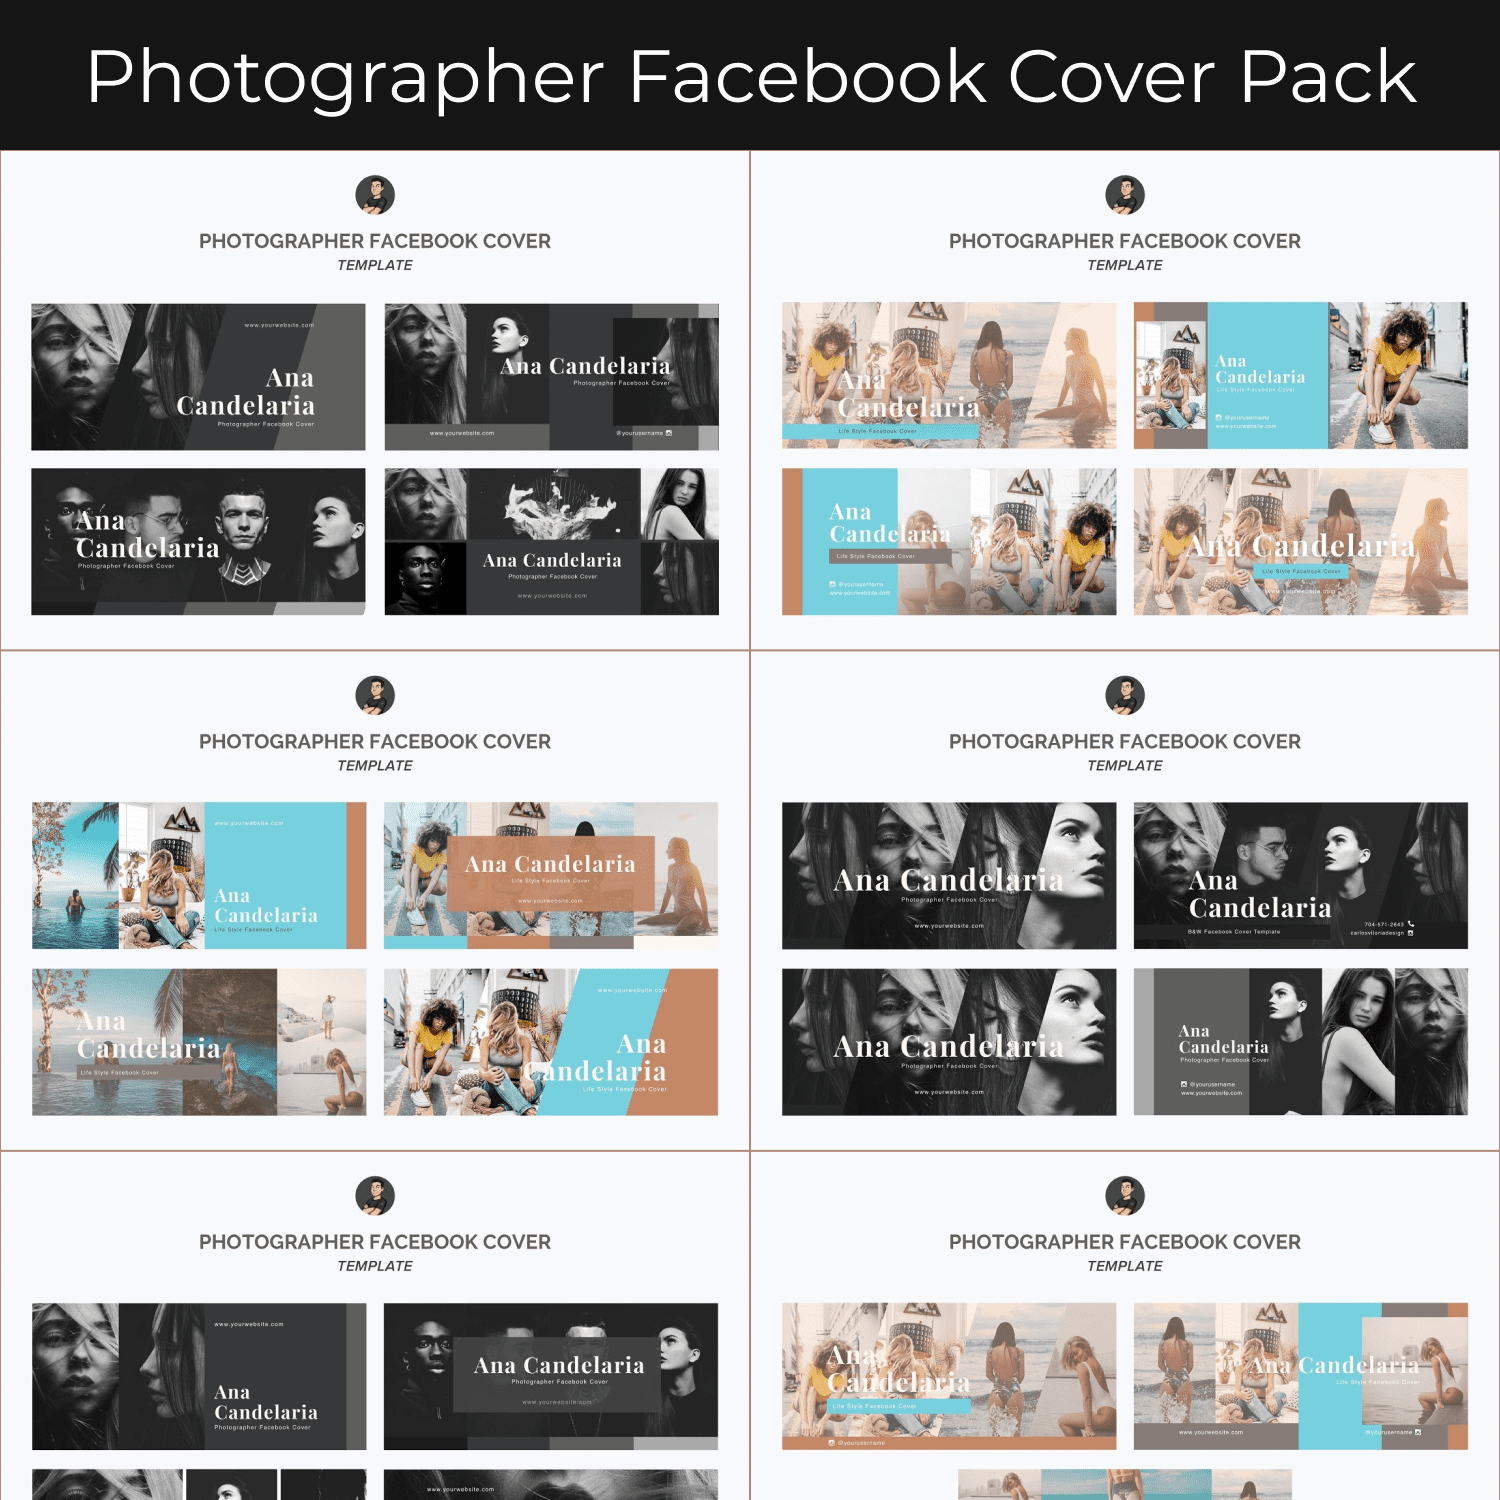 Photographer Facebook Cover Pack cover image.